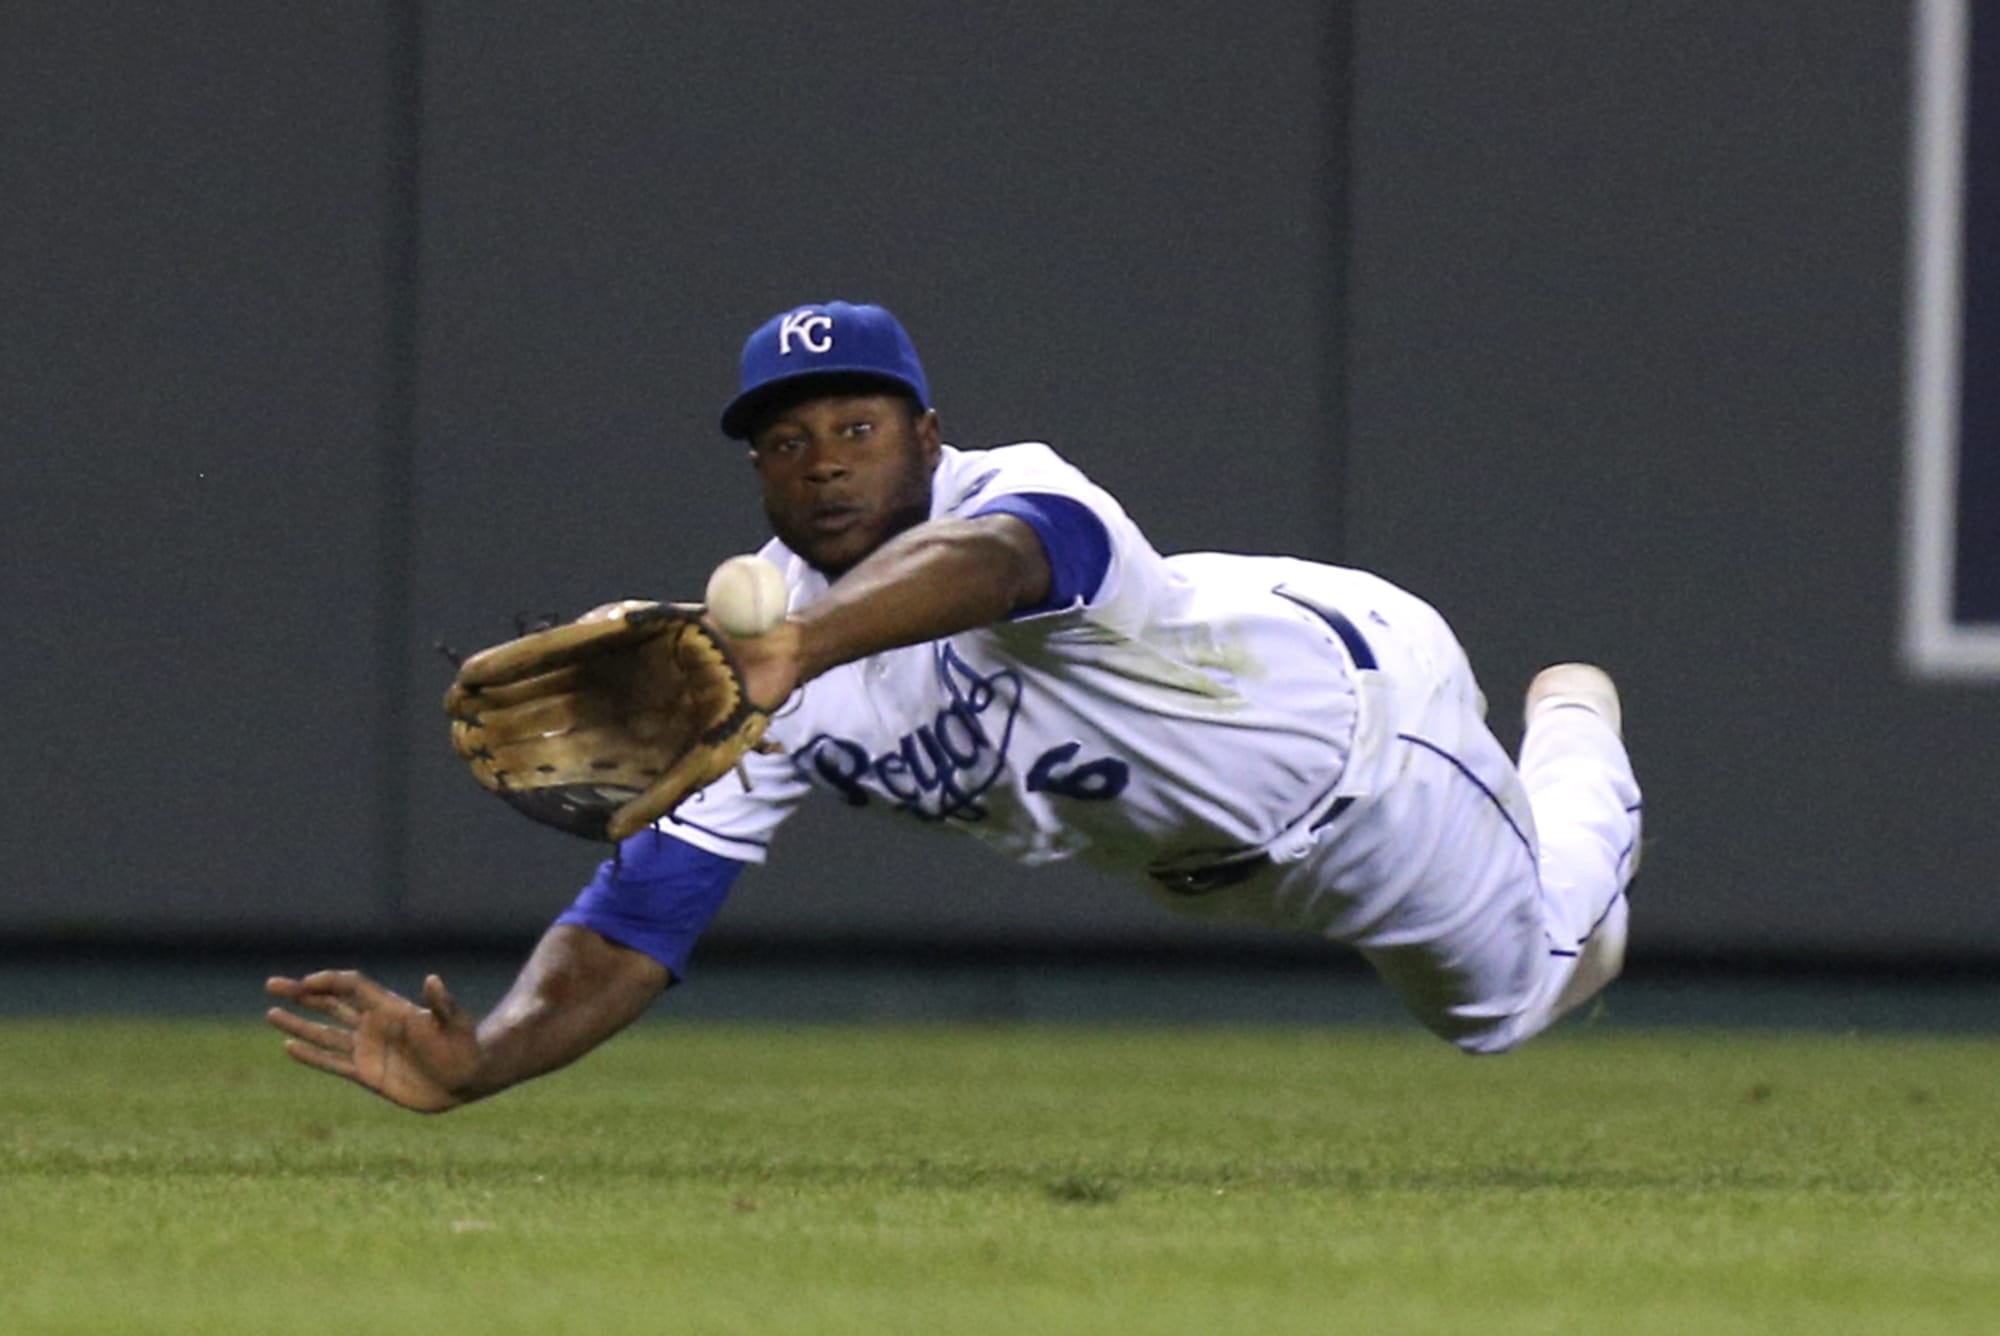 Lorenzo Cain made a name for himself as a member of the Kansas City Royals